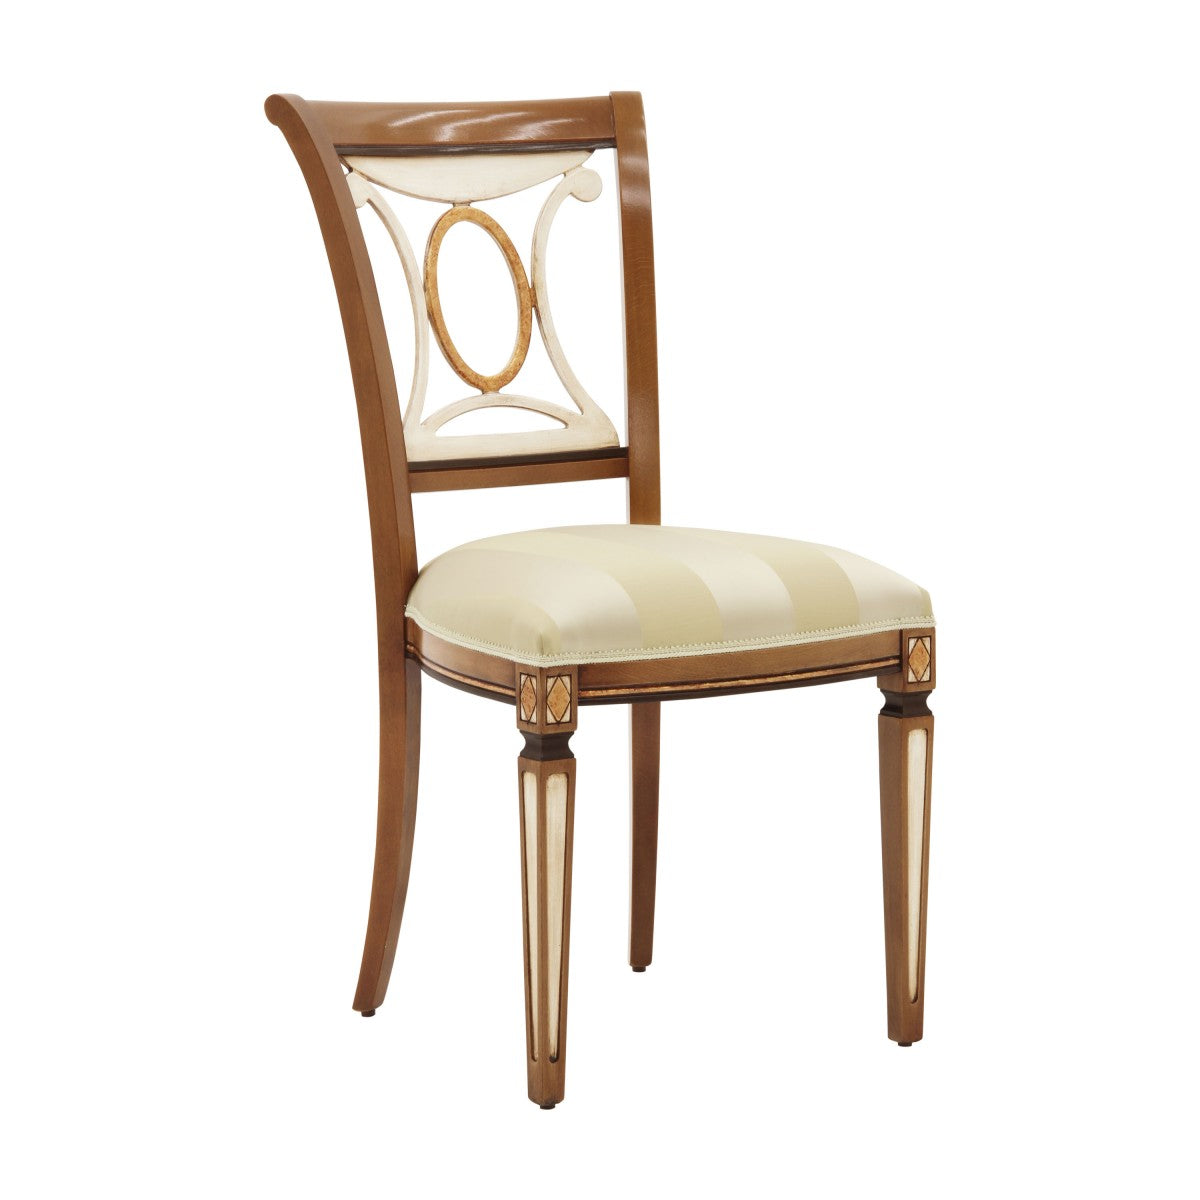 Bow Bespoke Upholstered Classic Style Dining Chair MS166S Custom Made To Order